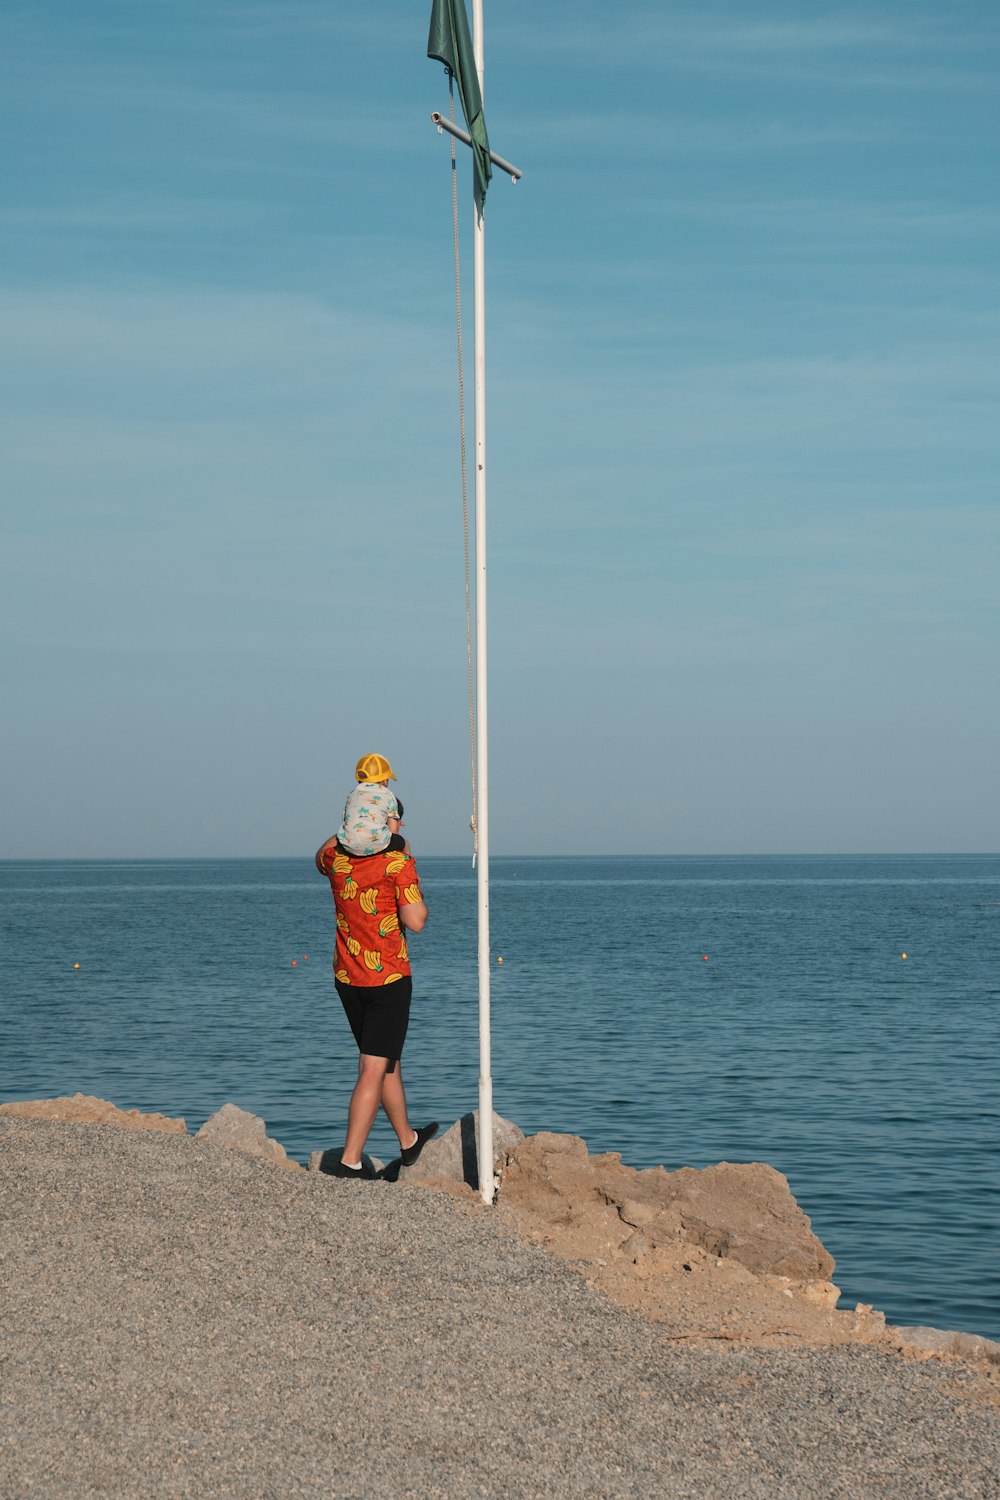 a person standing on a beach next to a flag pole